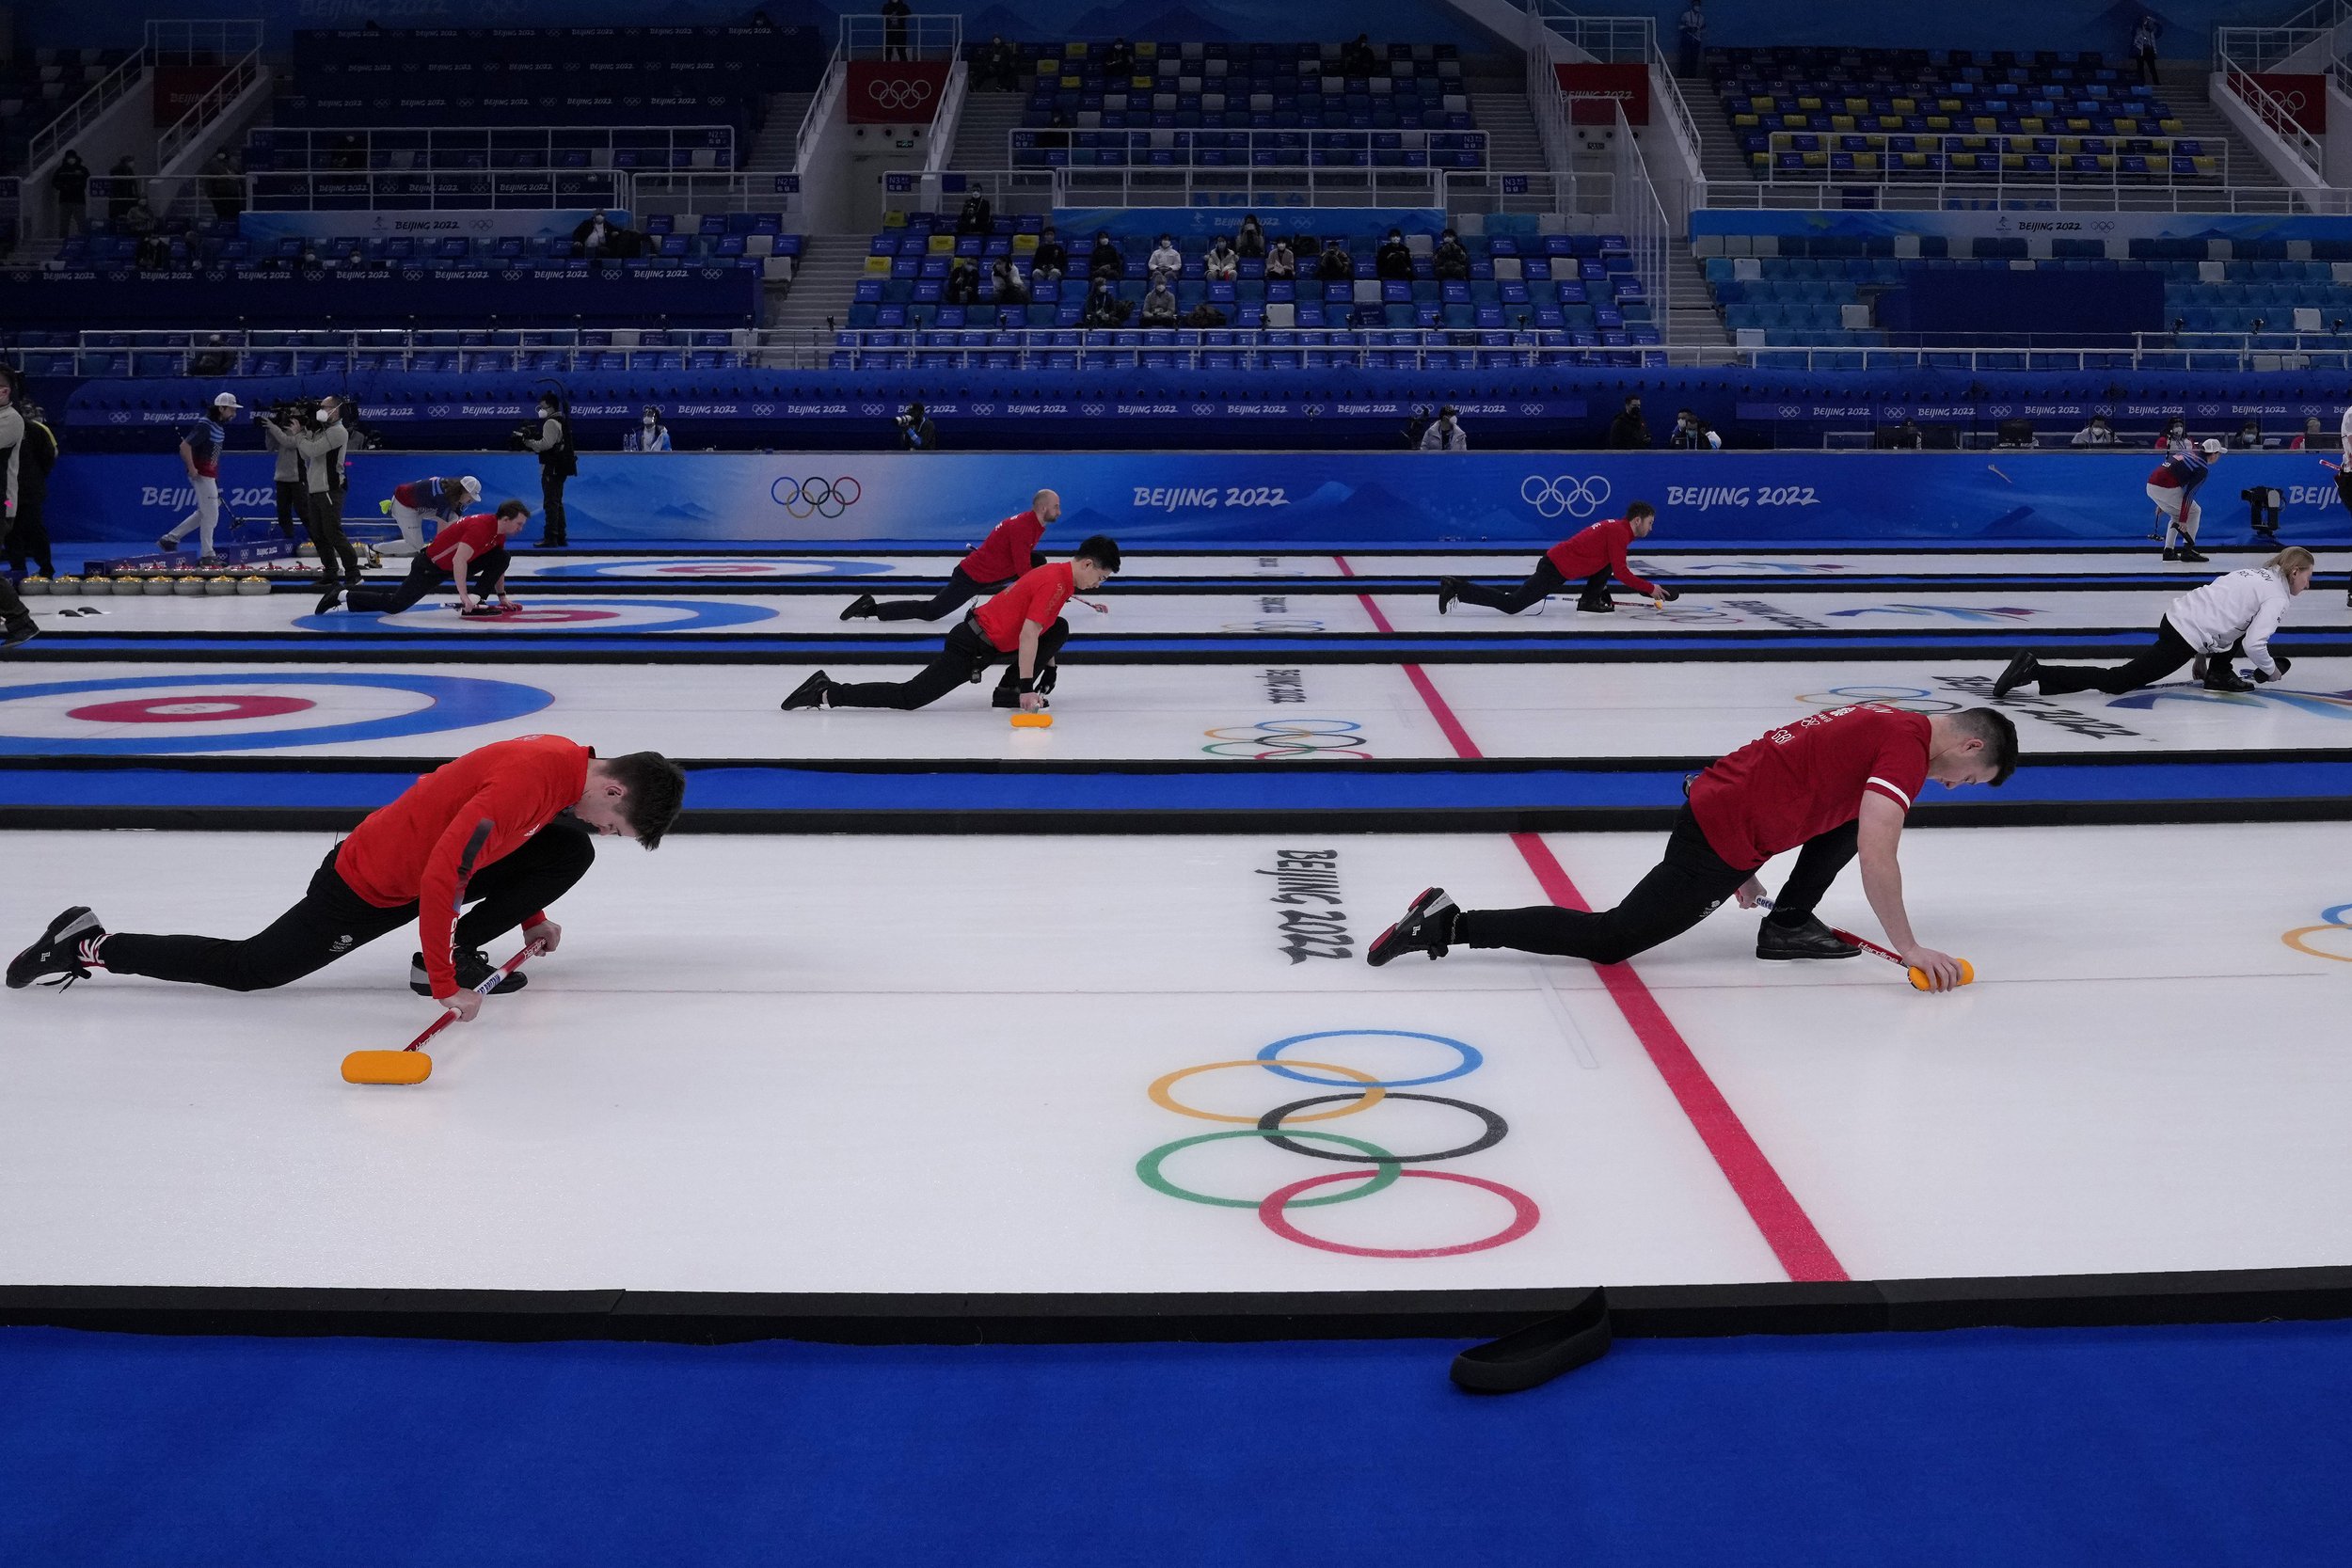  Men's teams warm up before their curling matches, at the 2022 Winter Olympics, Thursday, Feb. 10, 2022, in Beijing. (AP Photo/Nariman El-Mofty) 